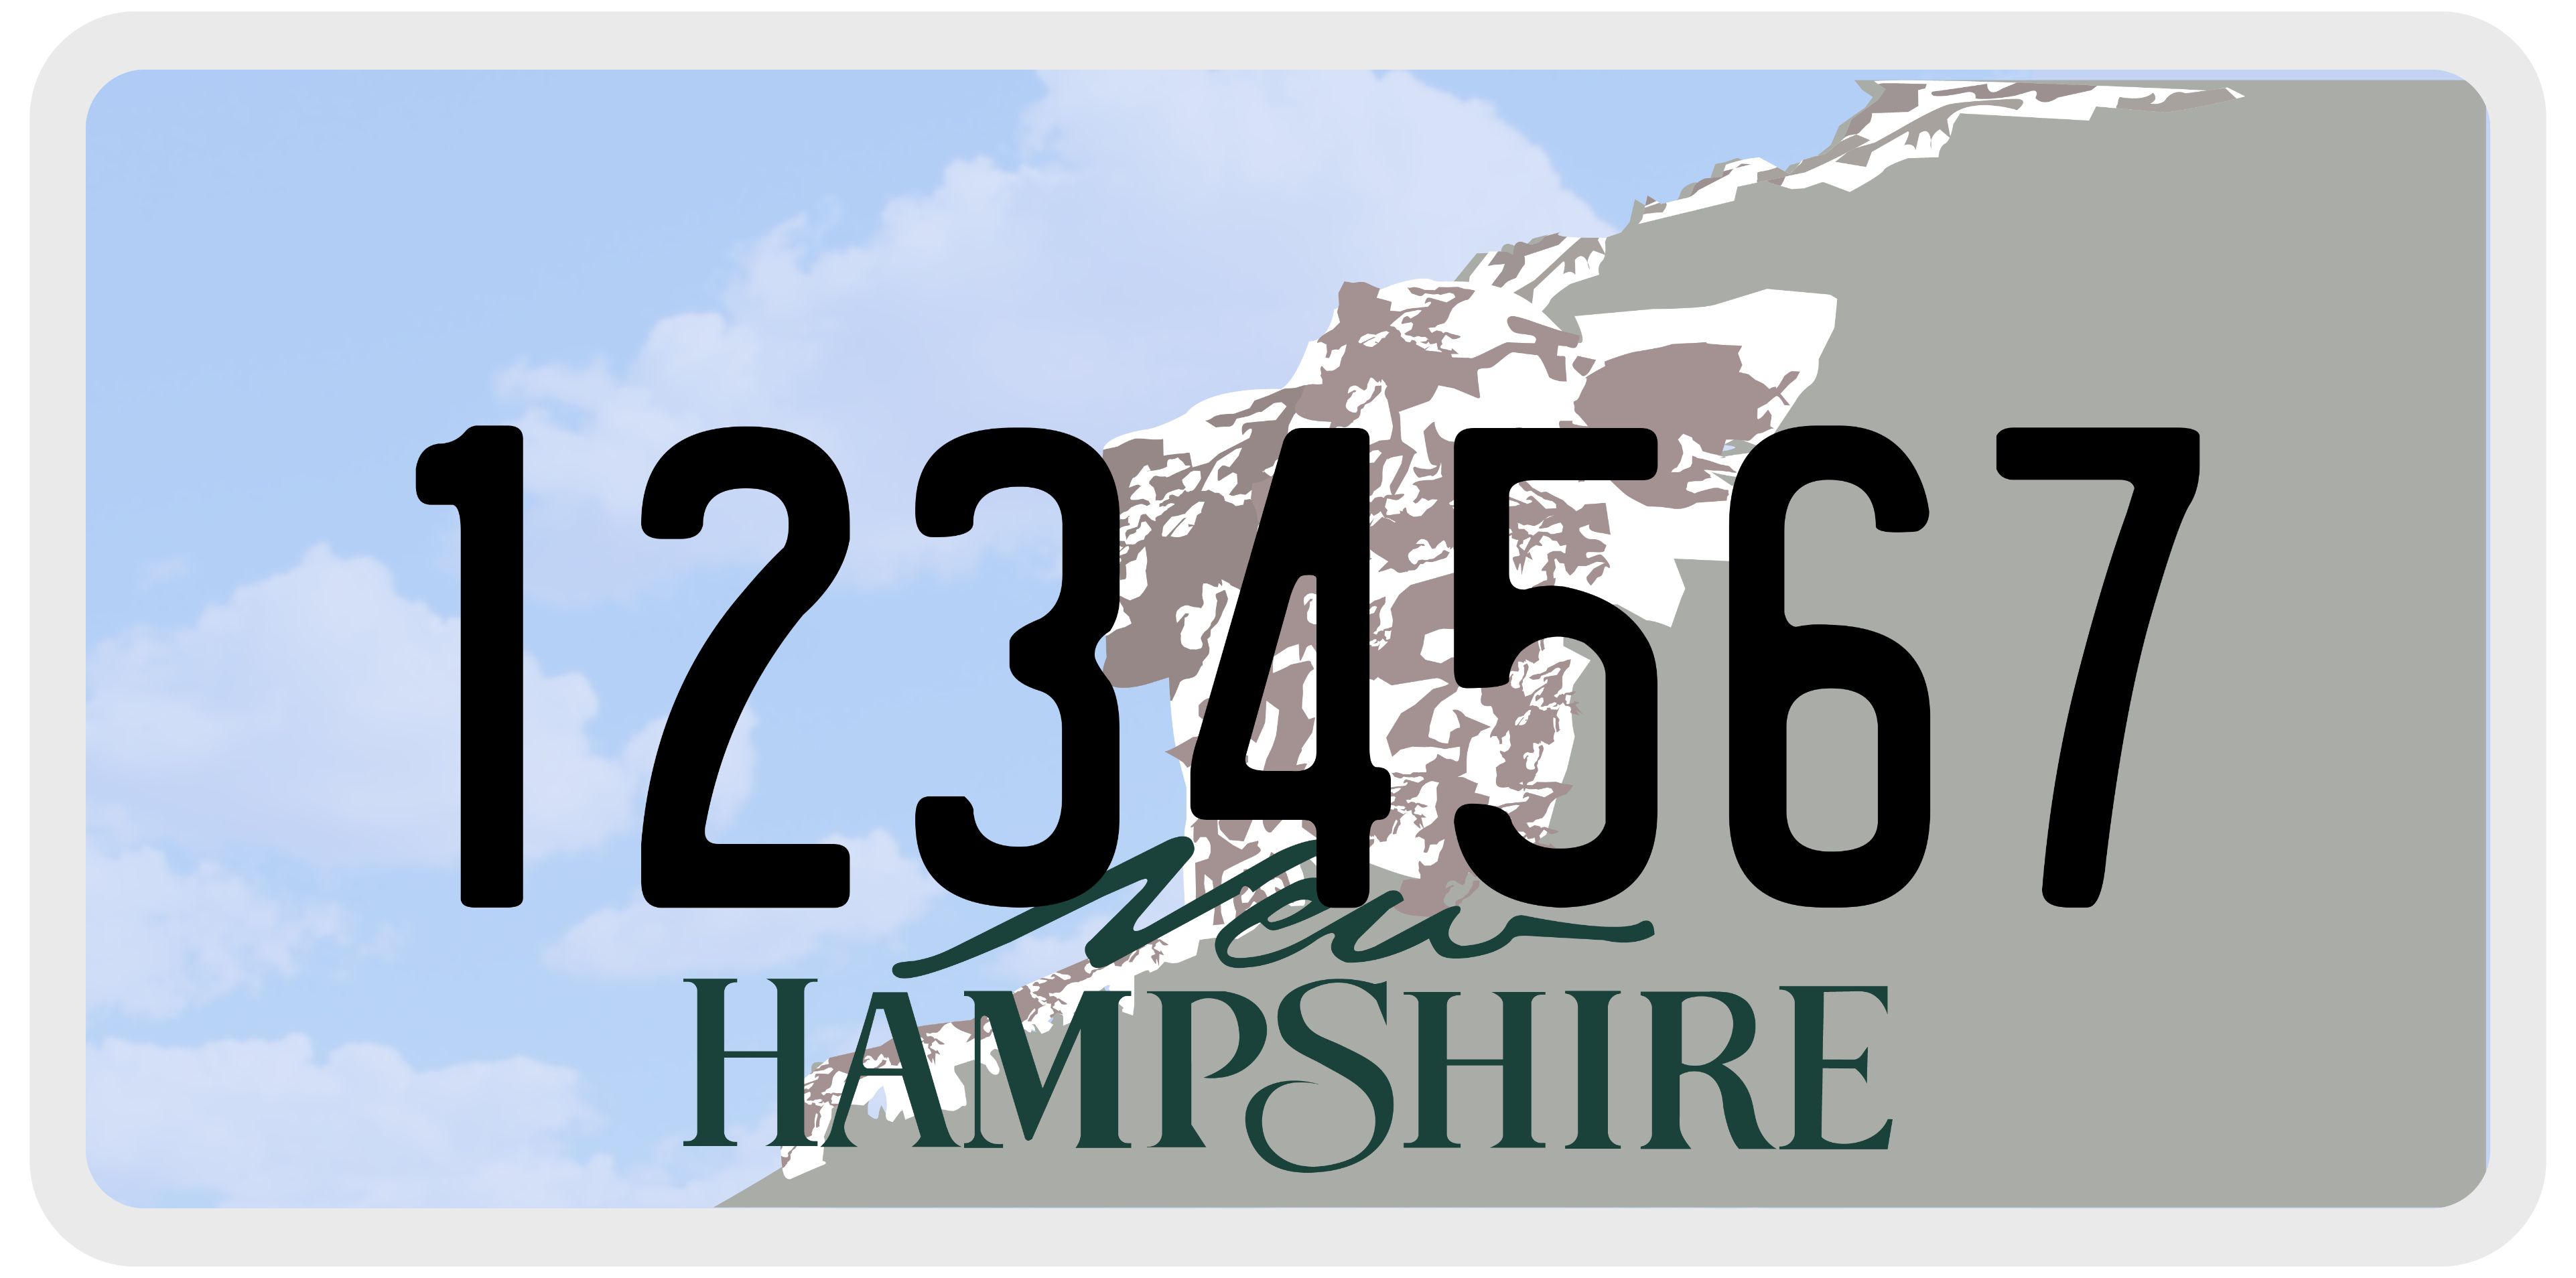 New Hampshire License Plate Sample